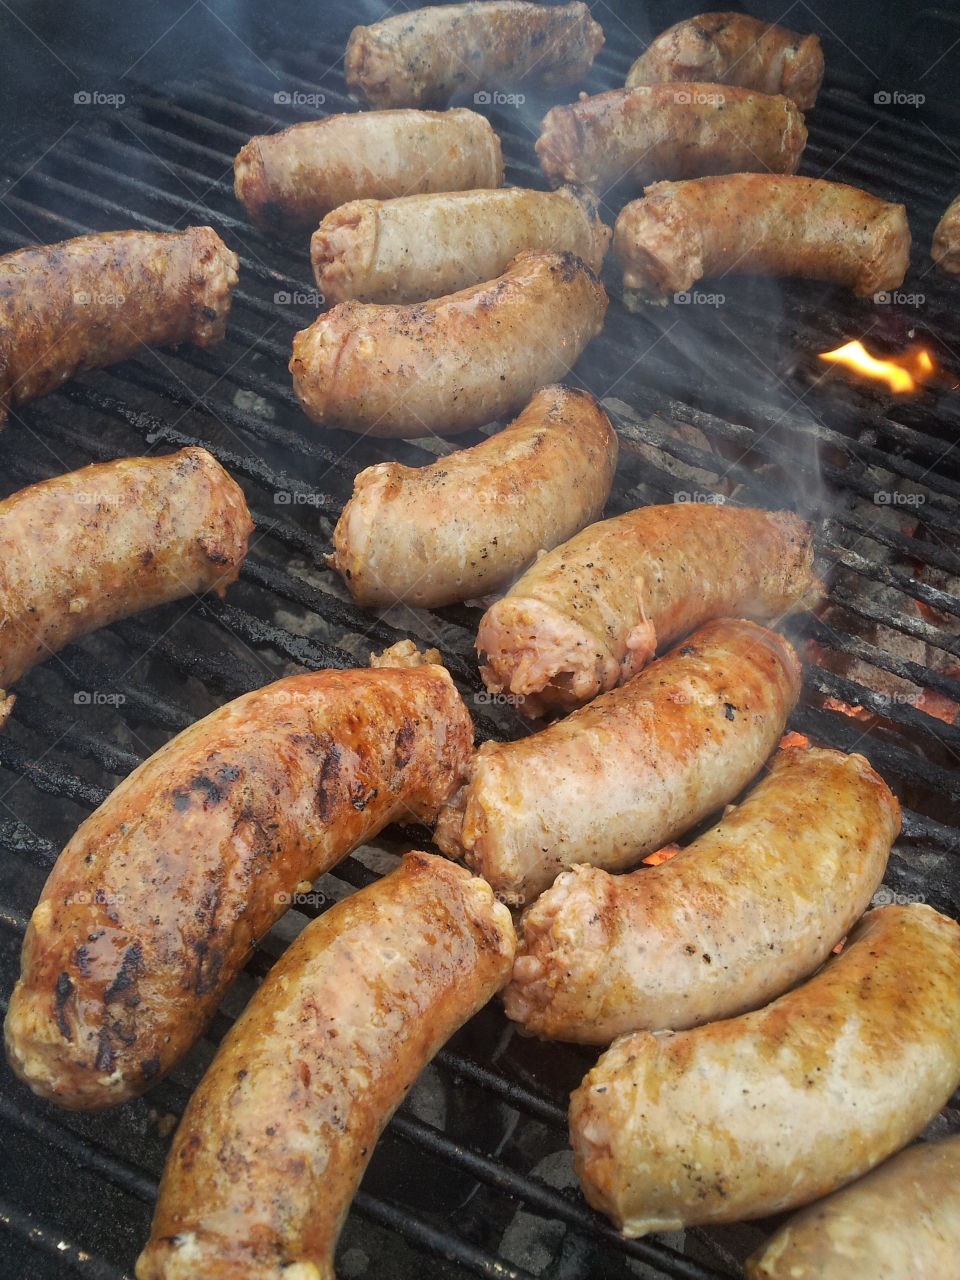 Sausage on the grill